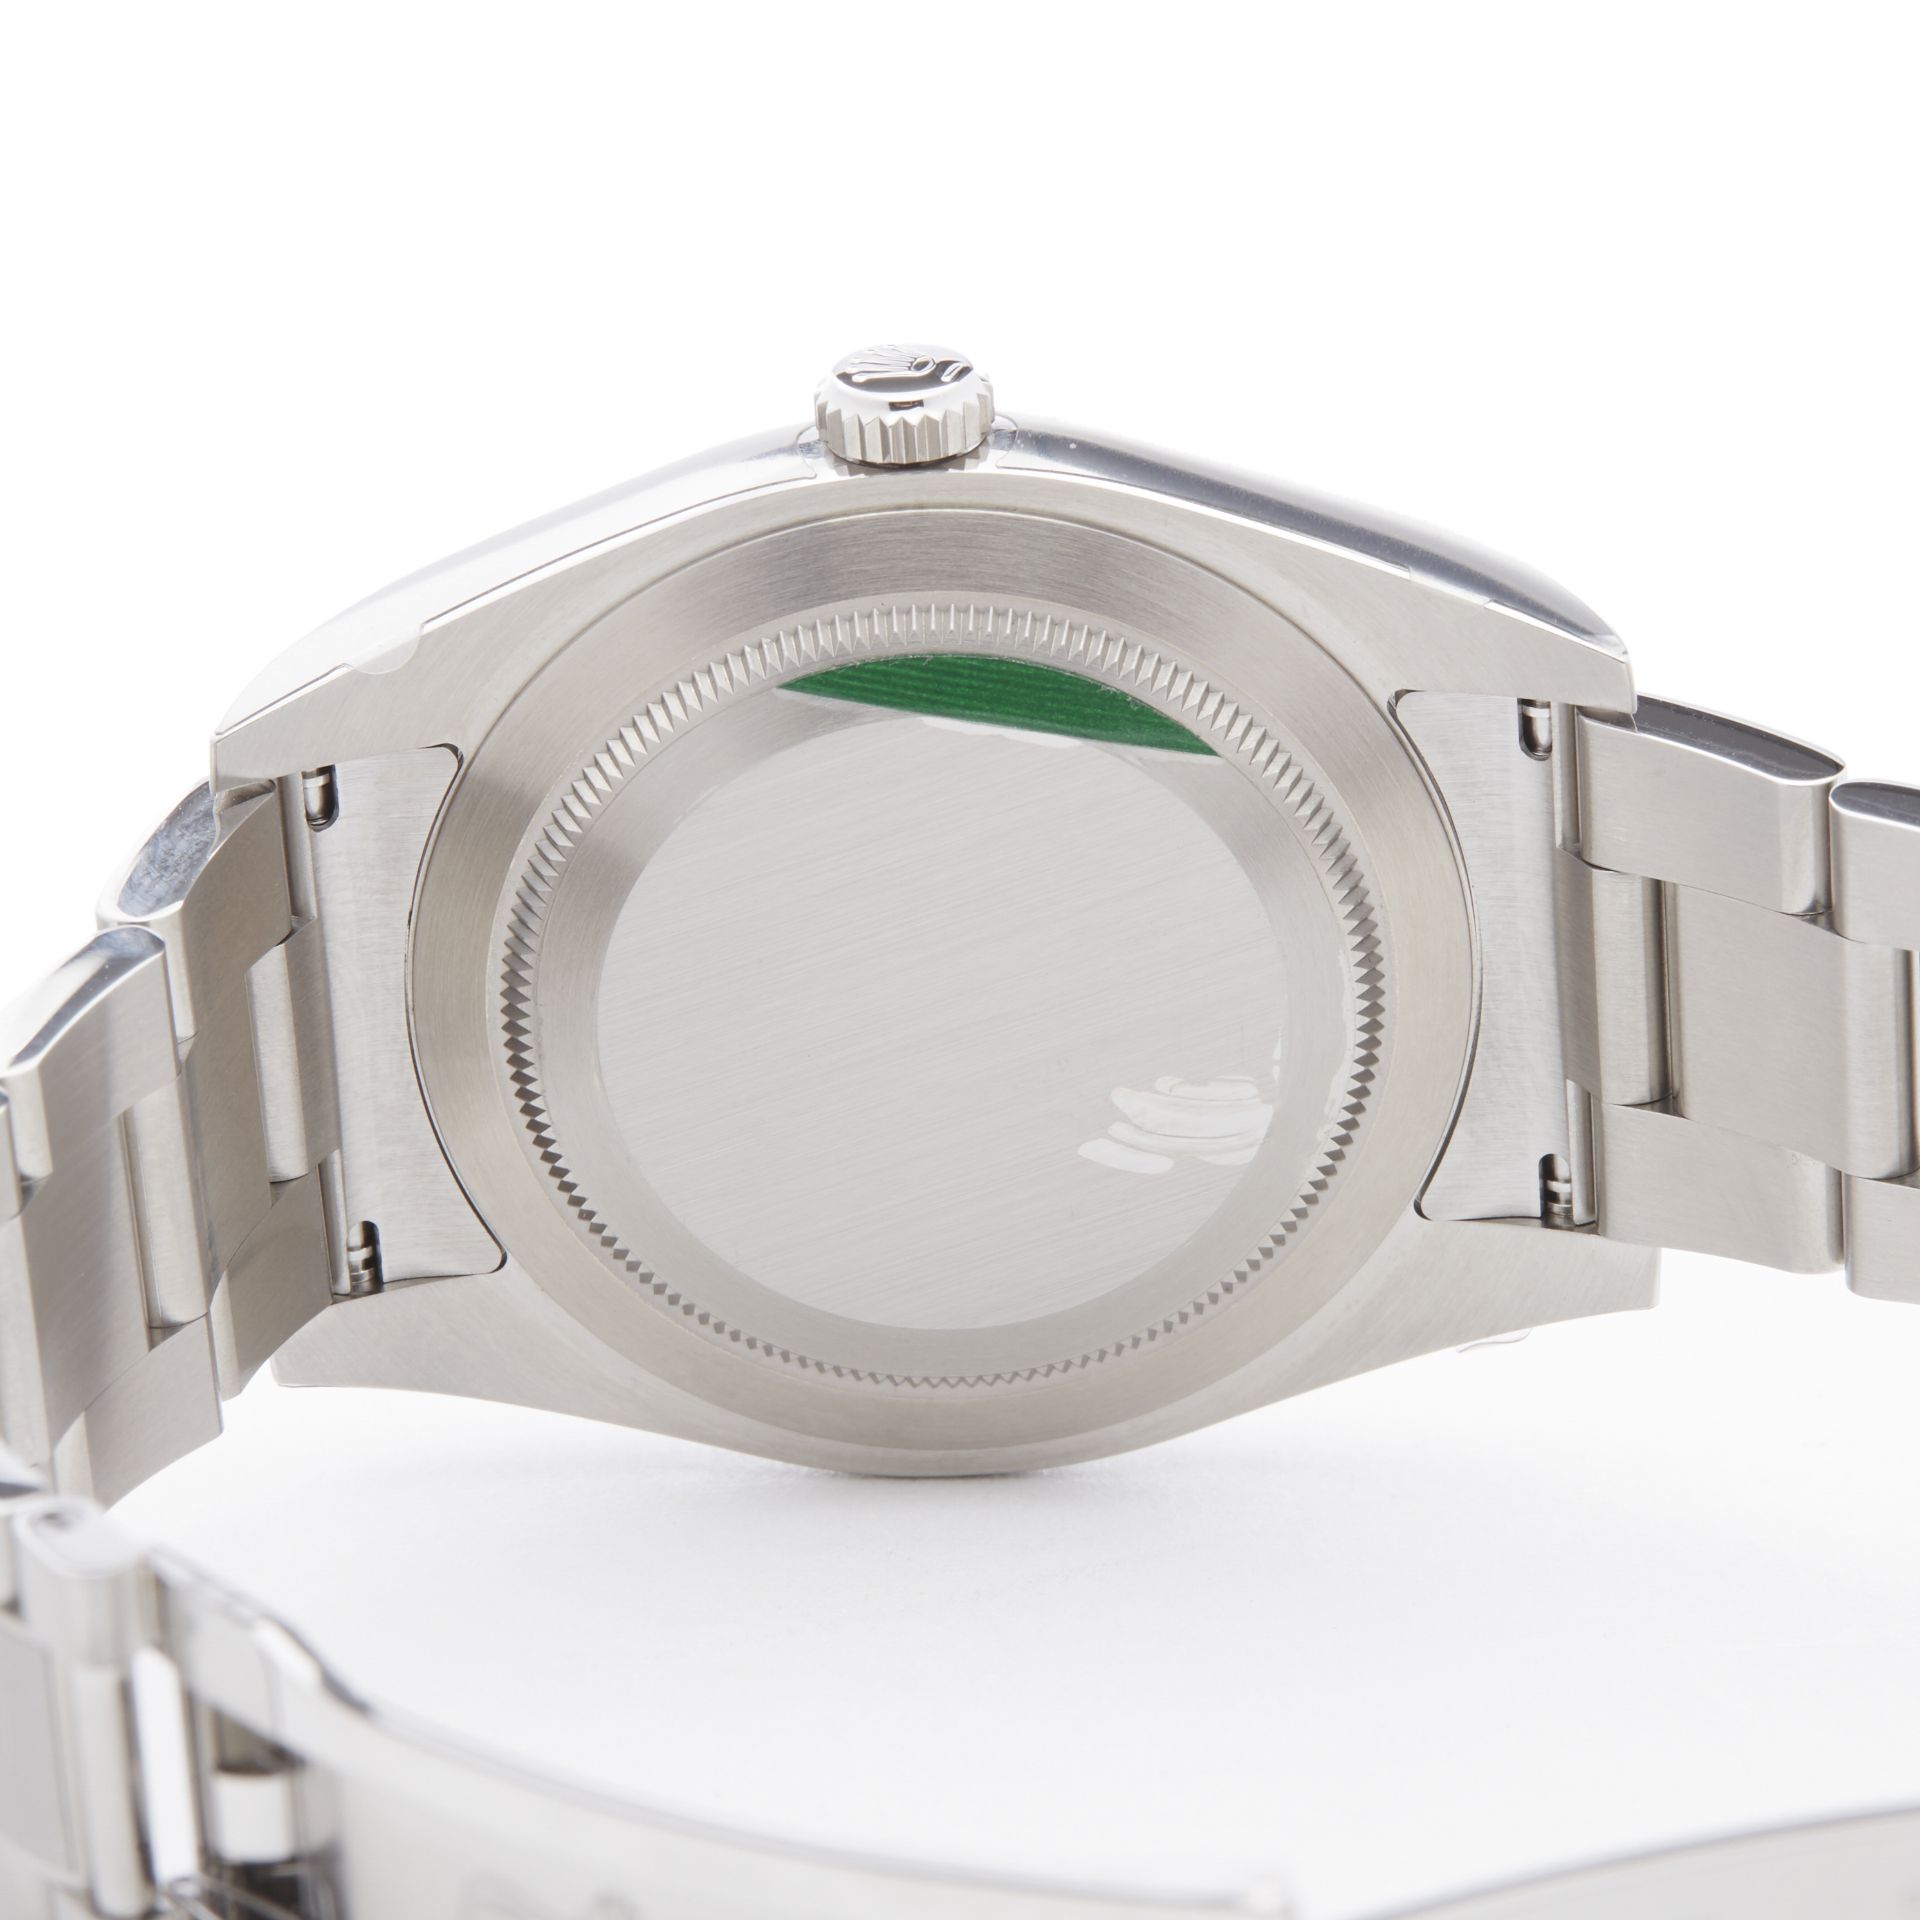 Rolex Oyster Perpetual Grape Stainless Steel - 114300 - Image 7 of 7